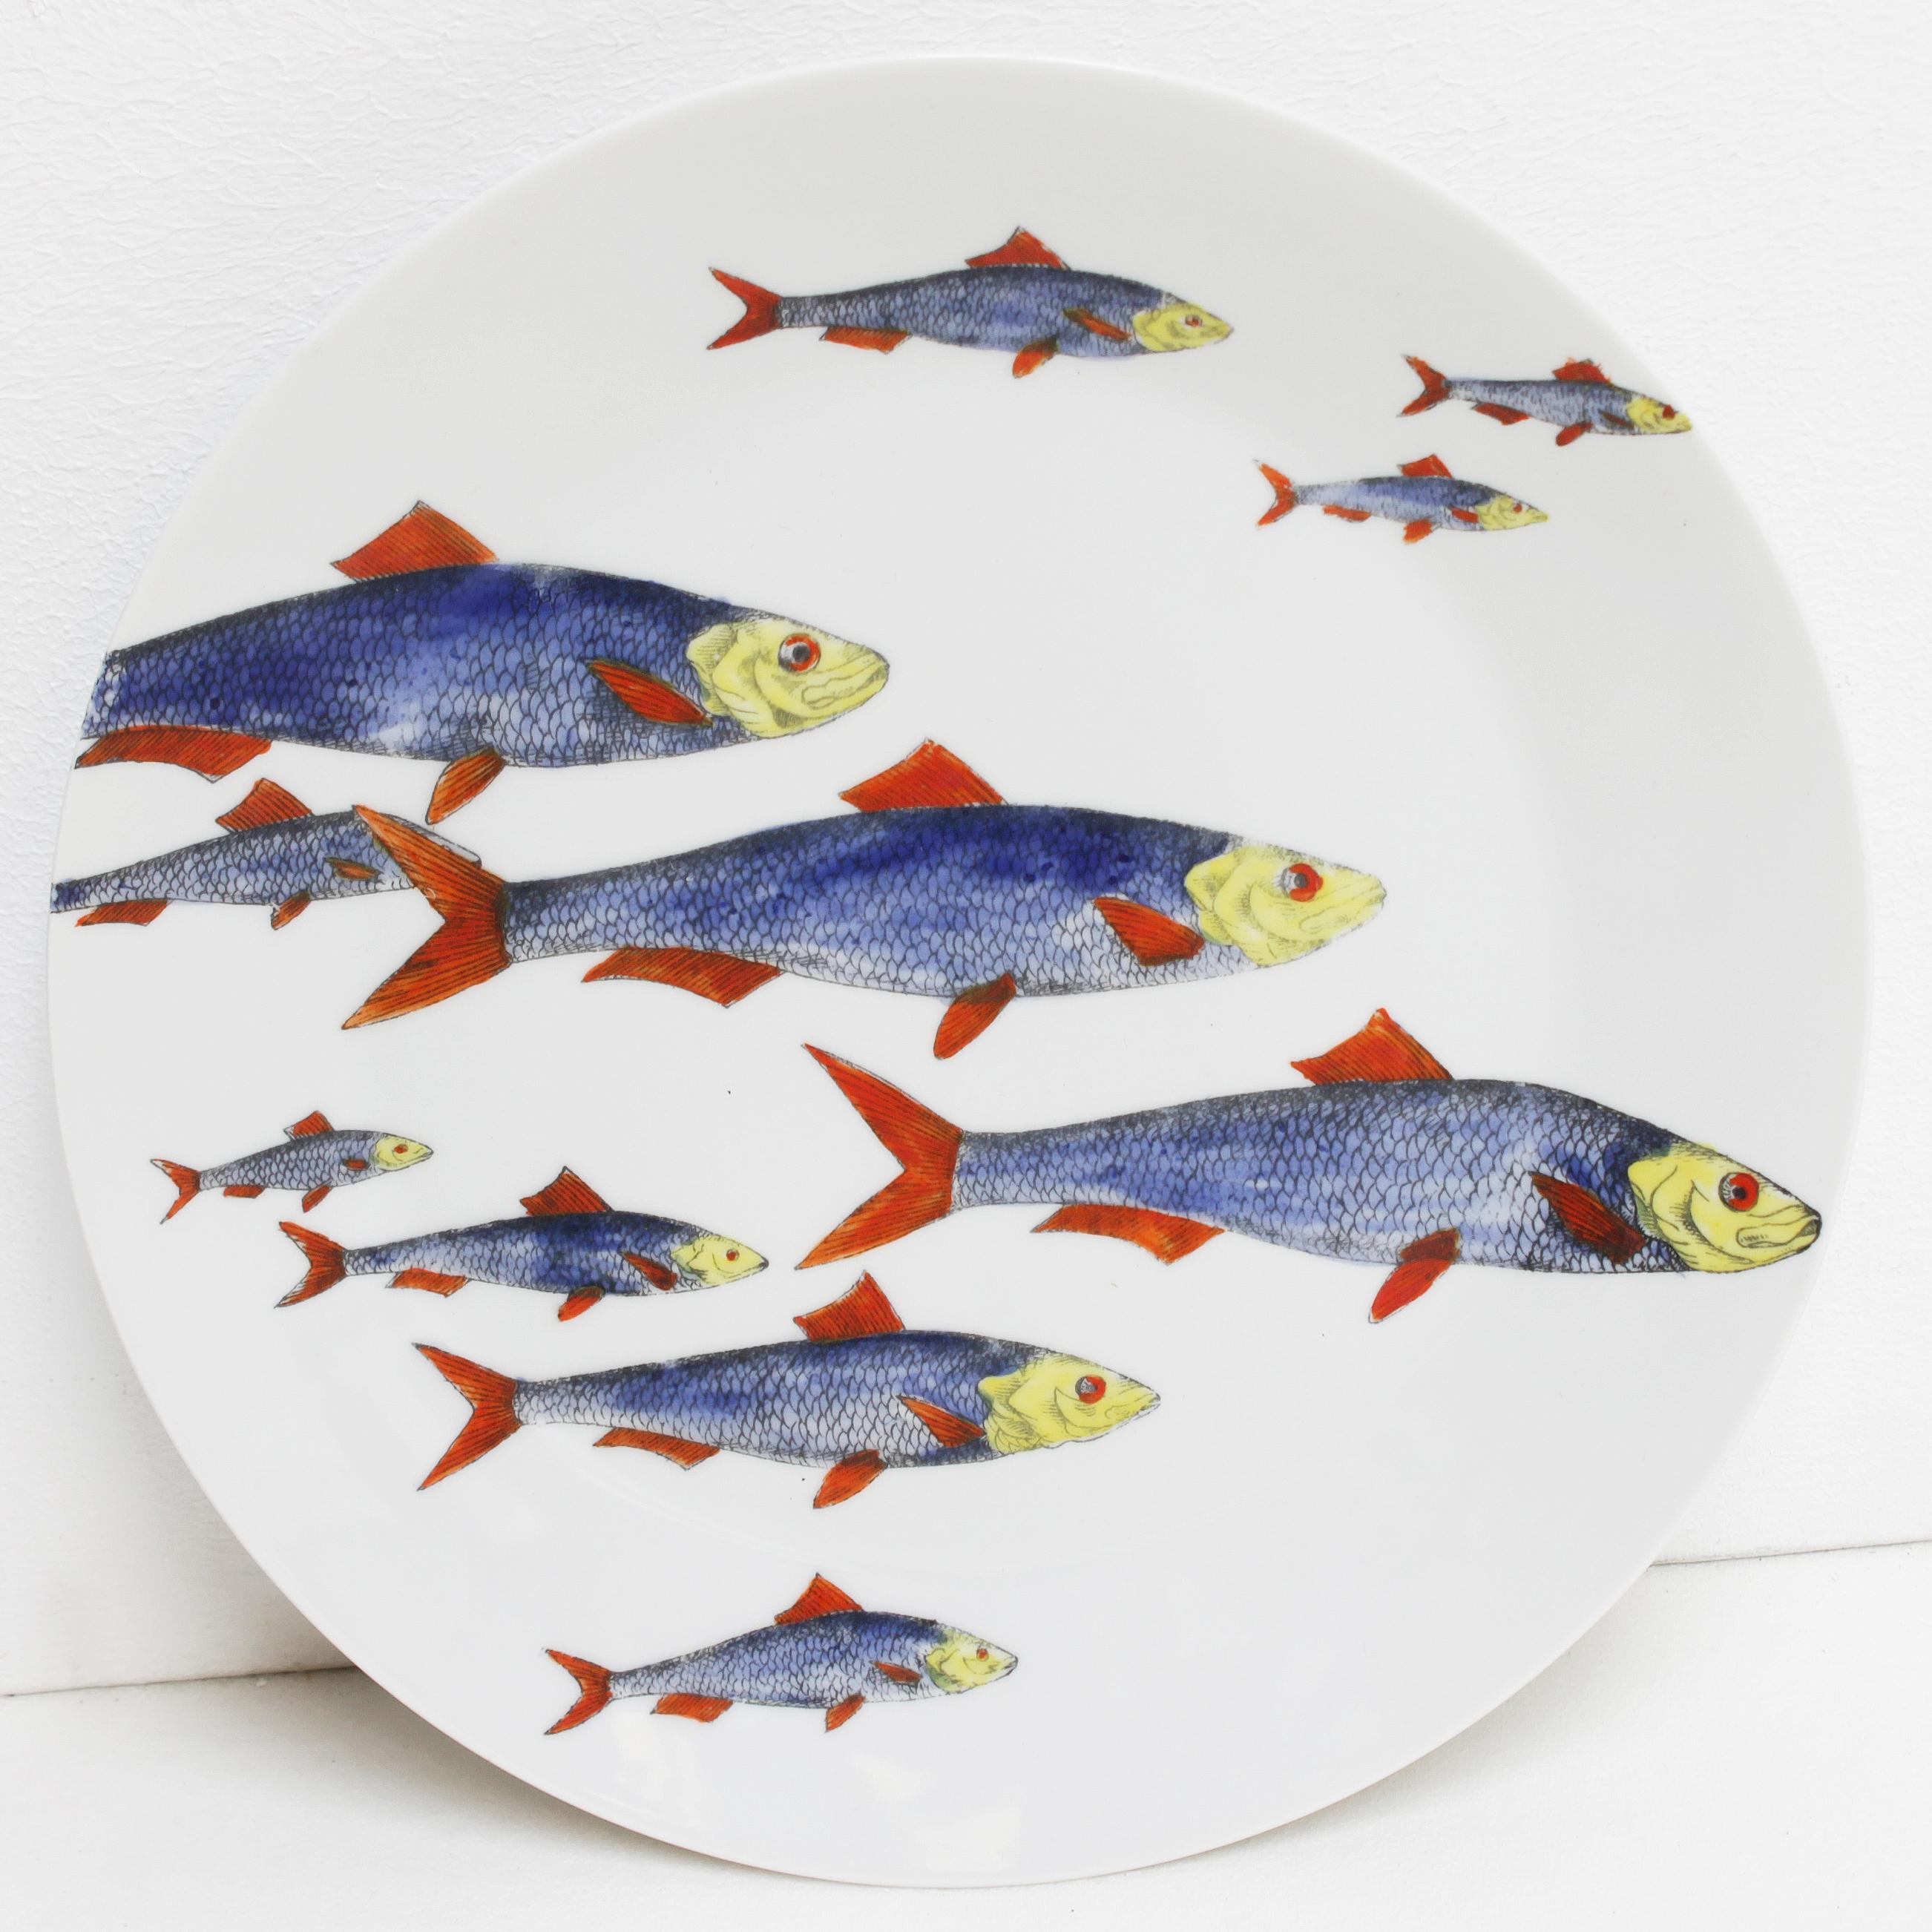 Complete set of six plates 'Passata di Pesce' (Passage of Fish) by Piero Fornasetti 1955.
Screen printed in black lines on German porcelain and painted in color by hand in the studio of Fornasetti in Italy. 
The plates are numbered, marked and